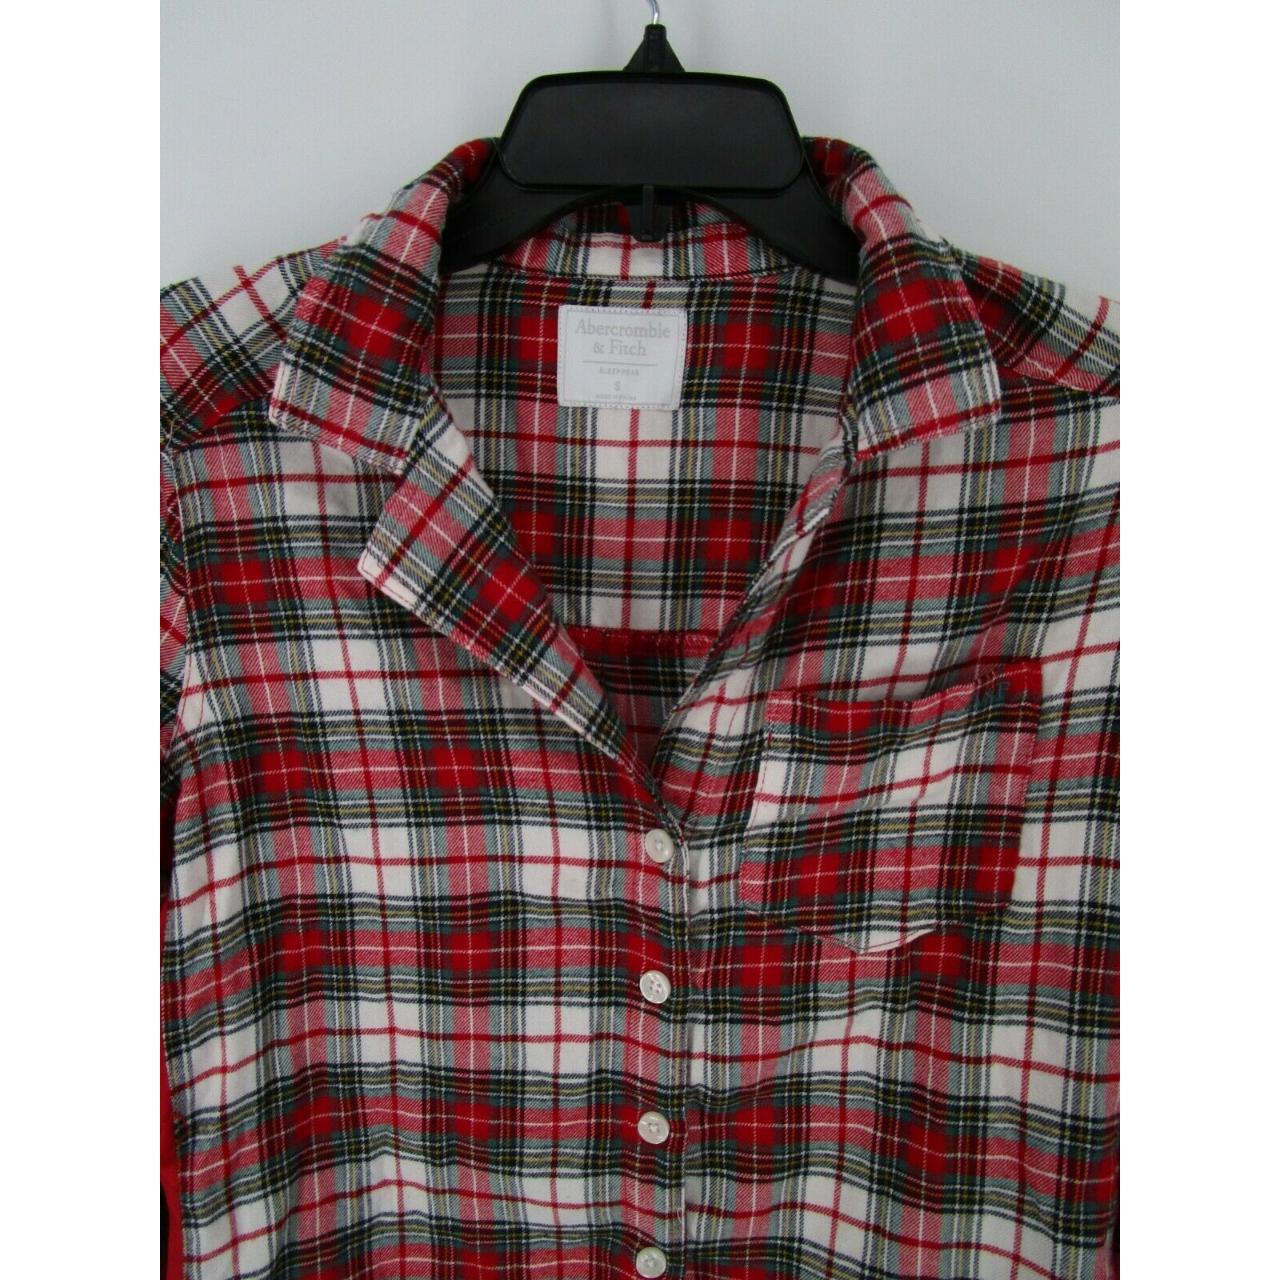 Product Image 2 - Abercrombie & Fitch Shirt Small